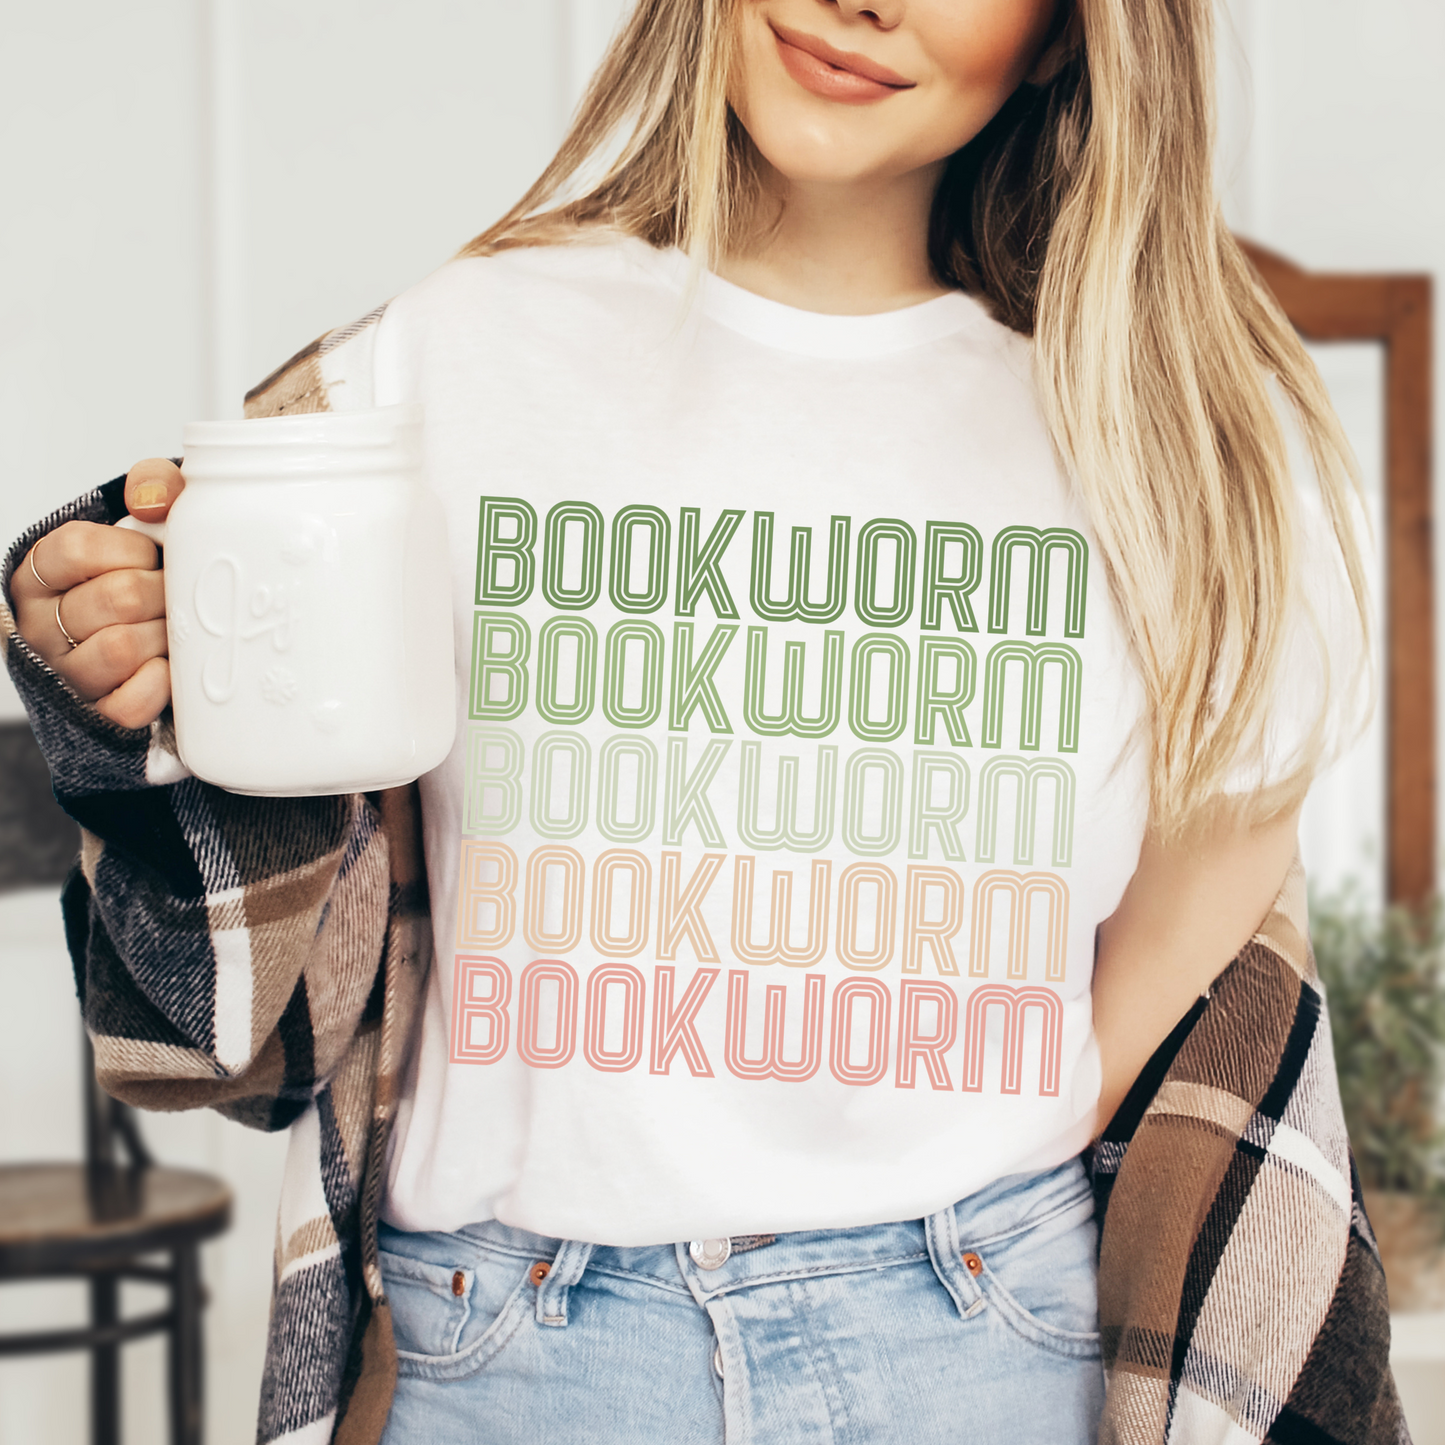 Bookworm tshirt | Book Lover Collection